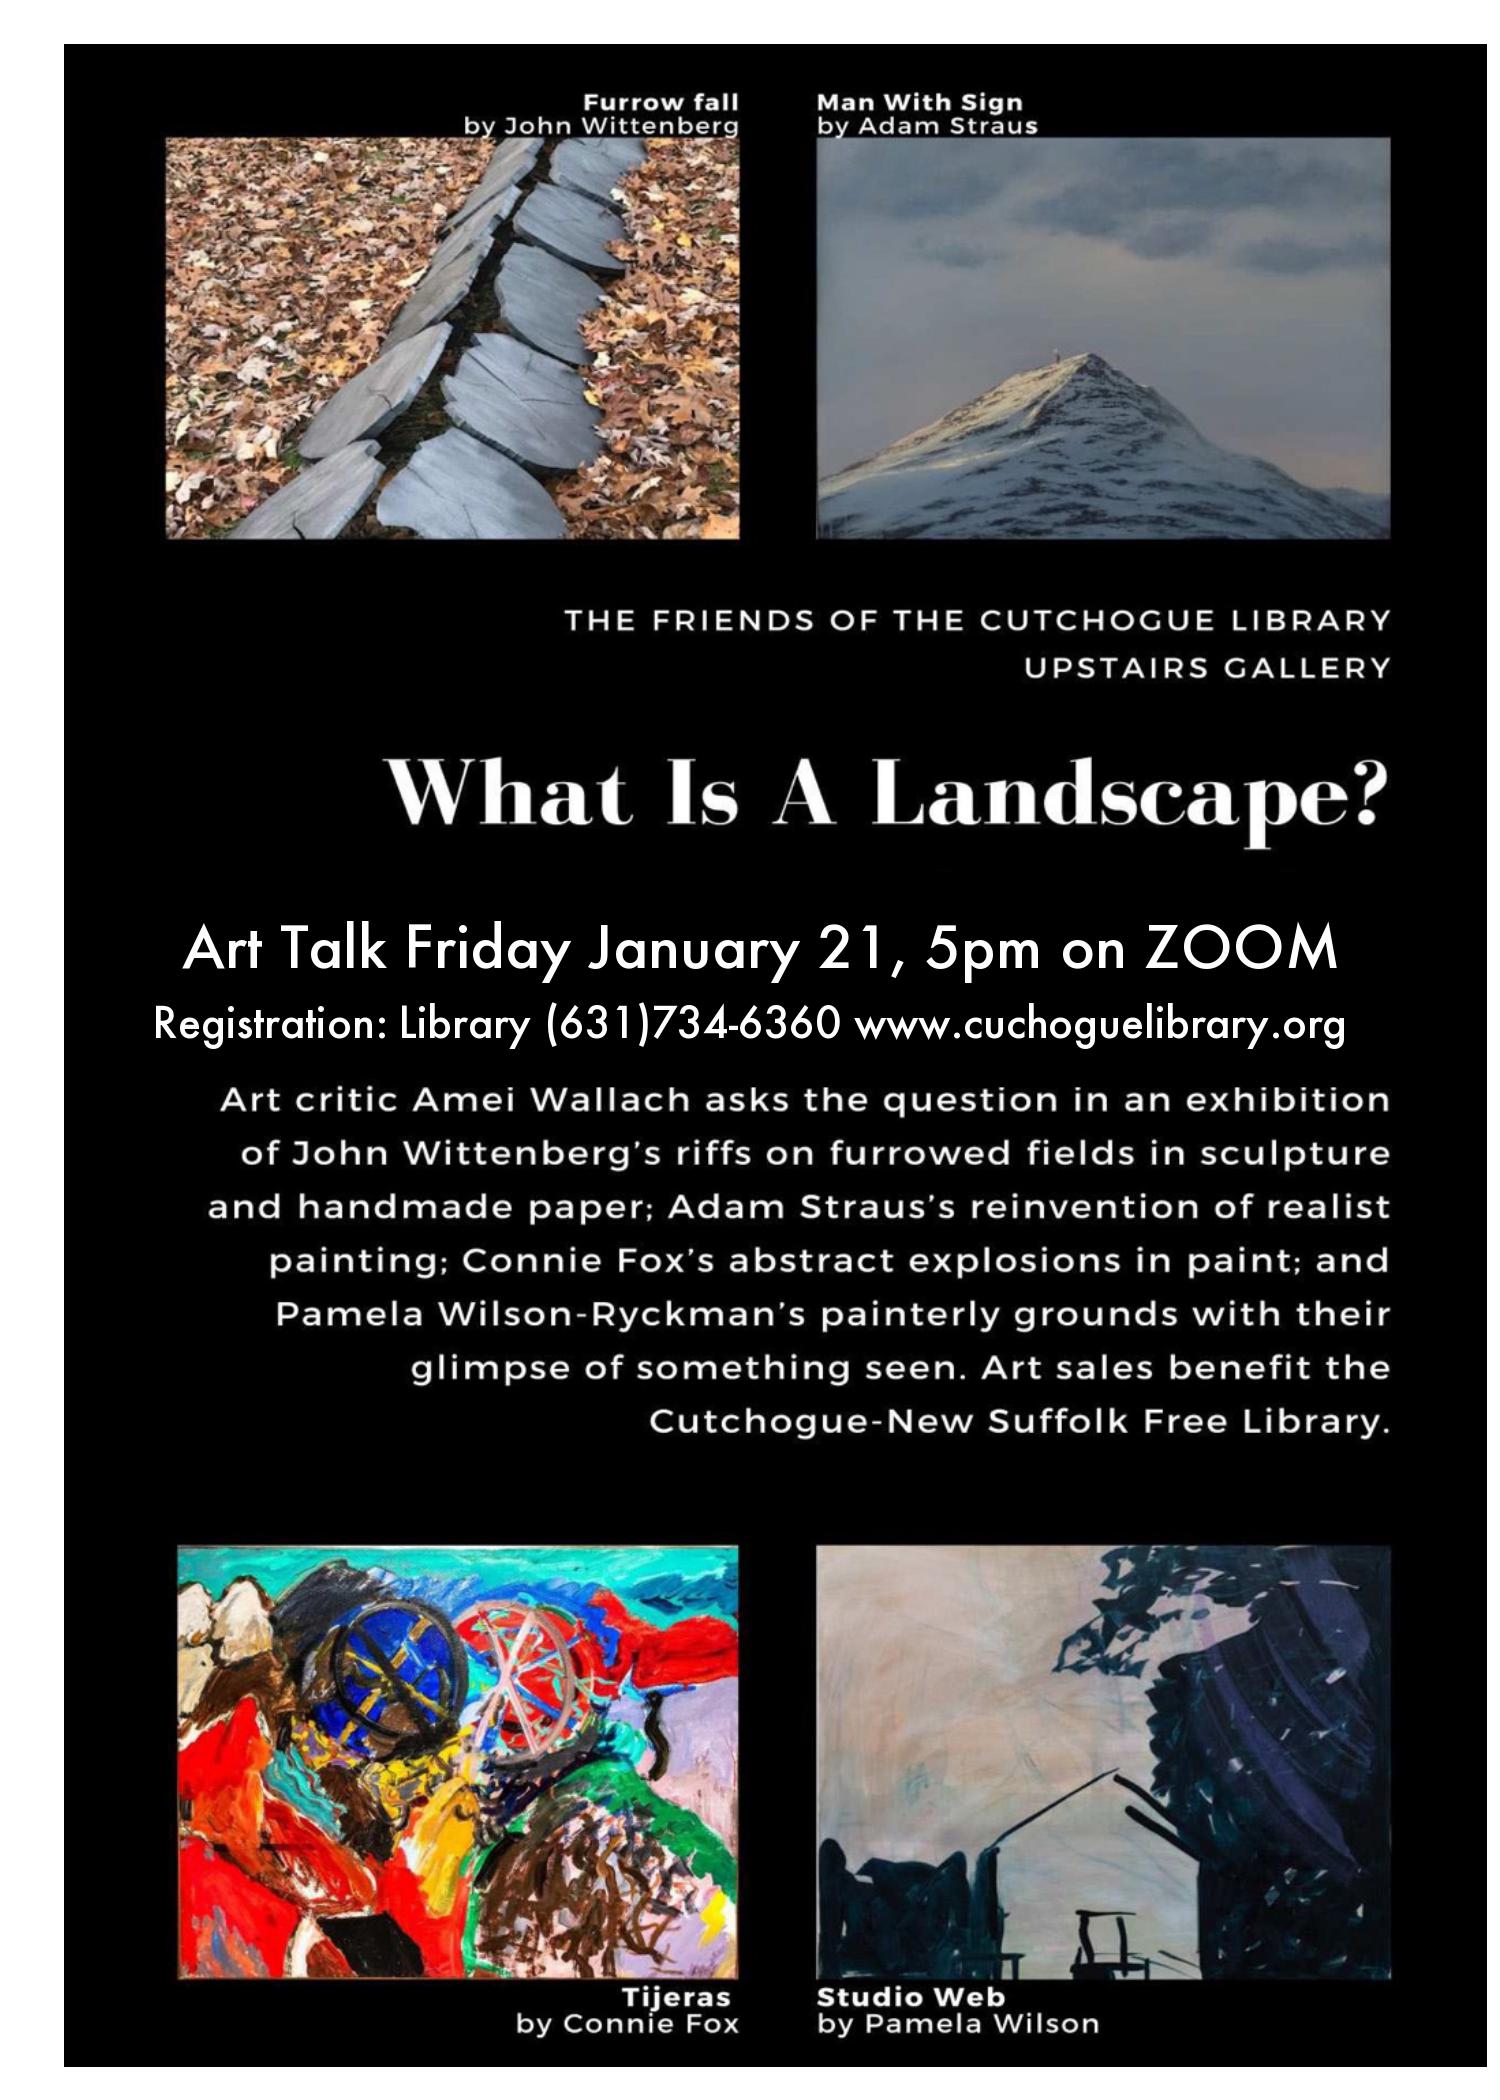 What Is A Landscape flier, image with 4 separate images of art pieces with descriptive text of program. 